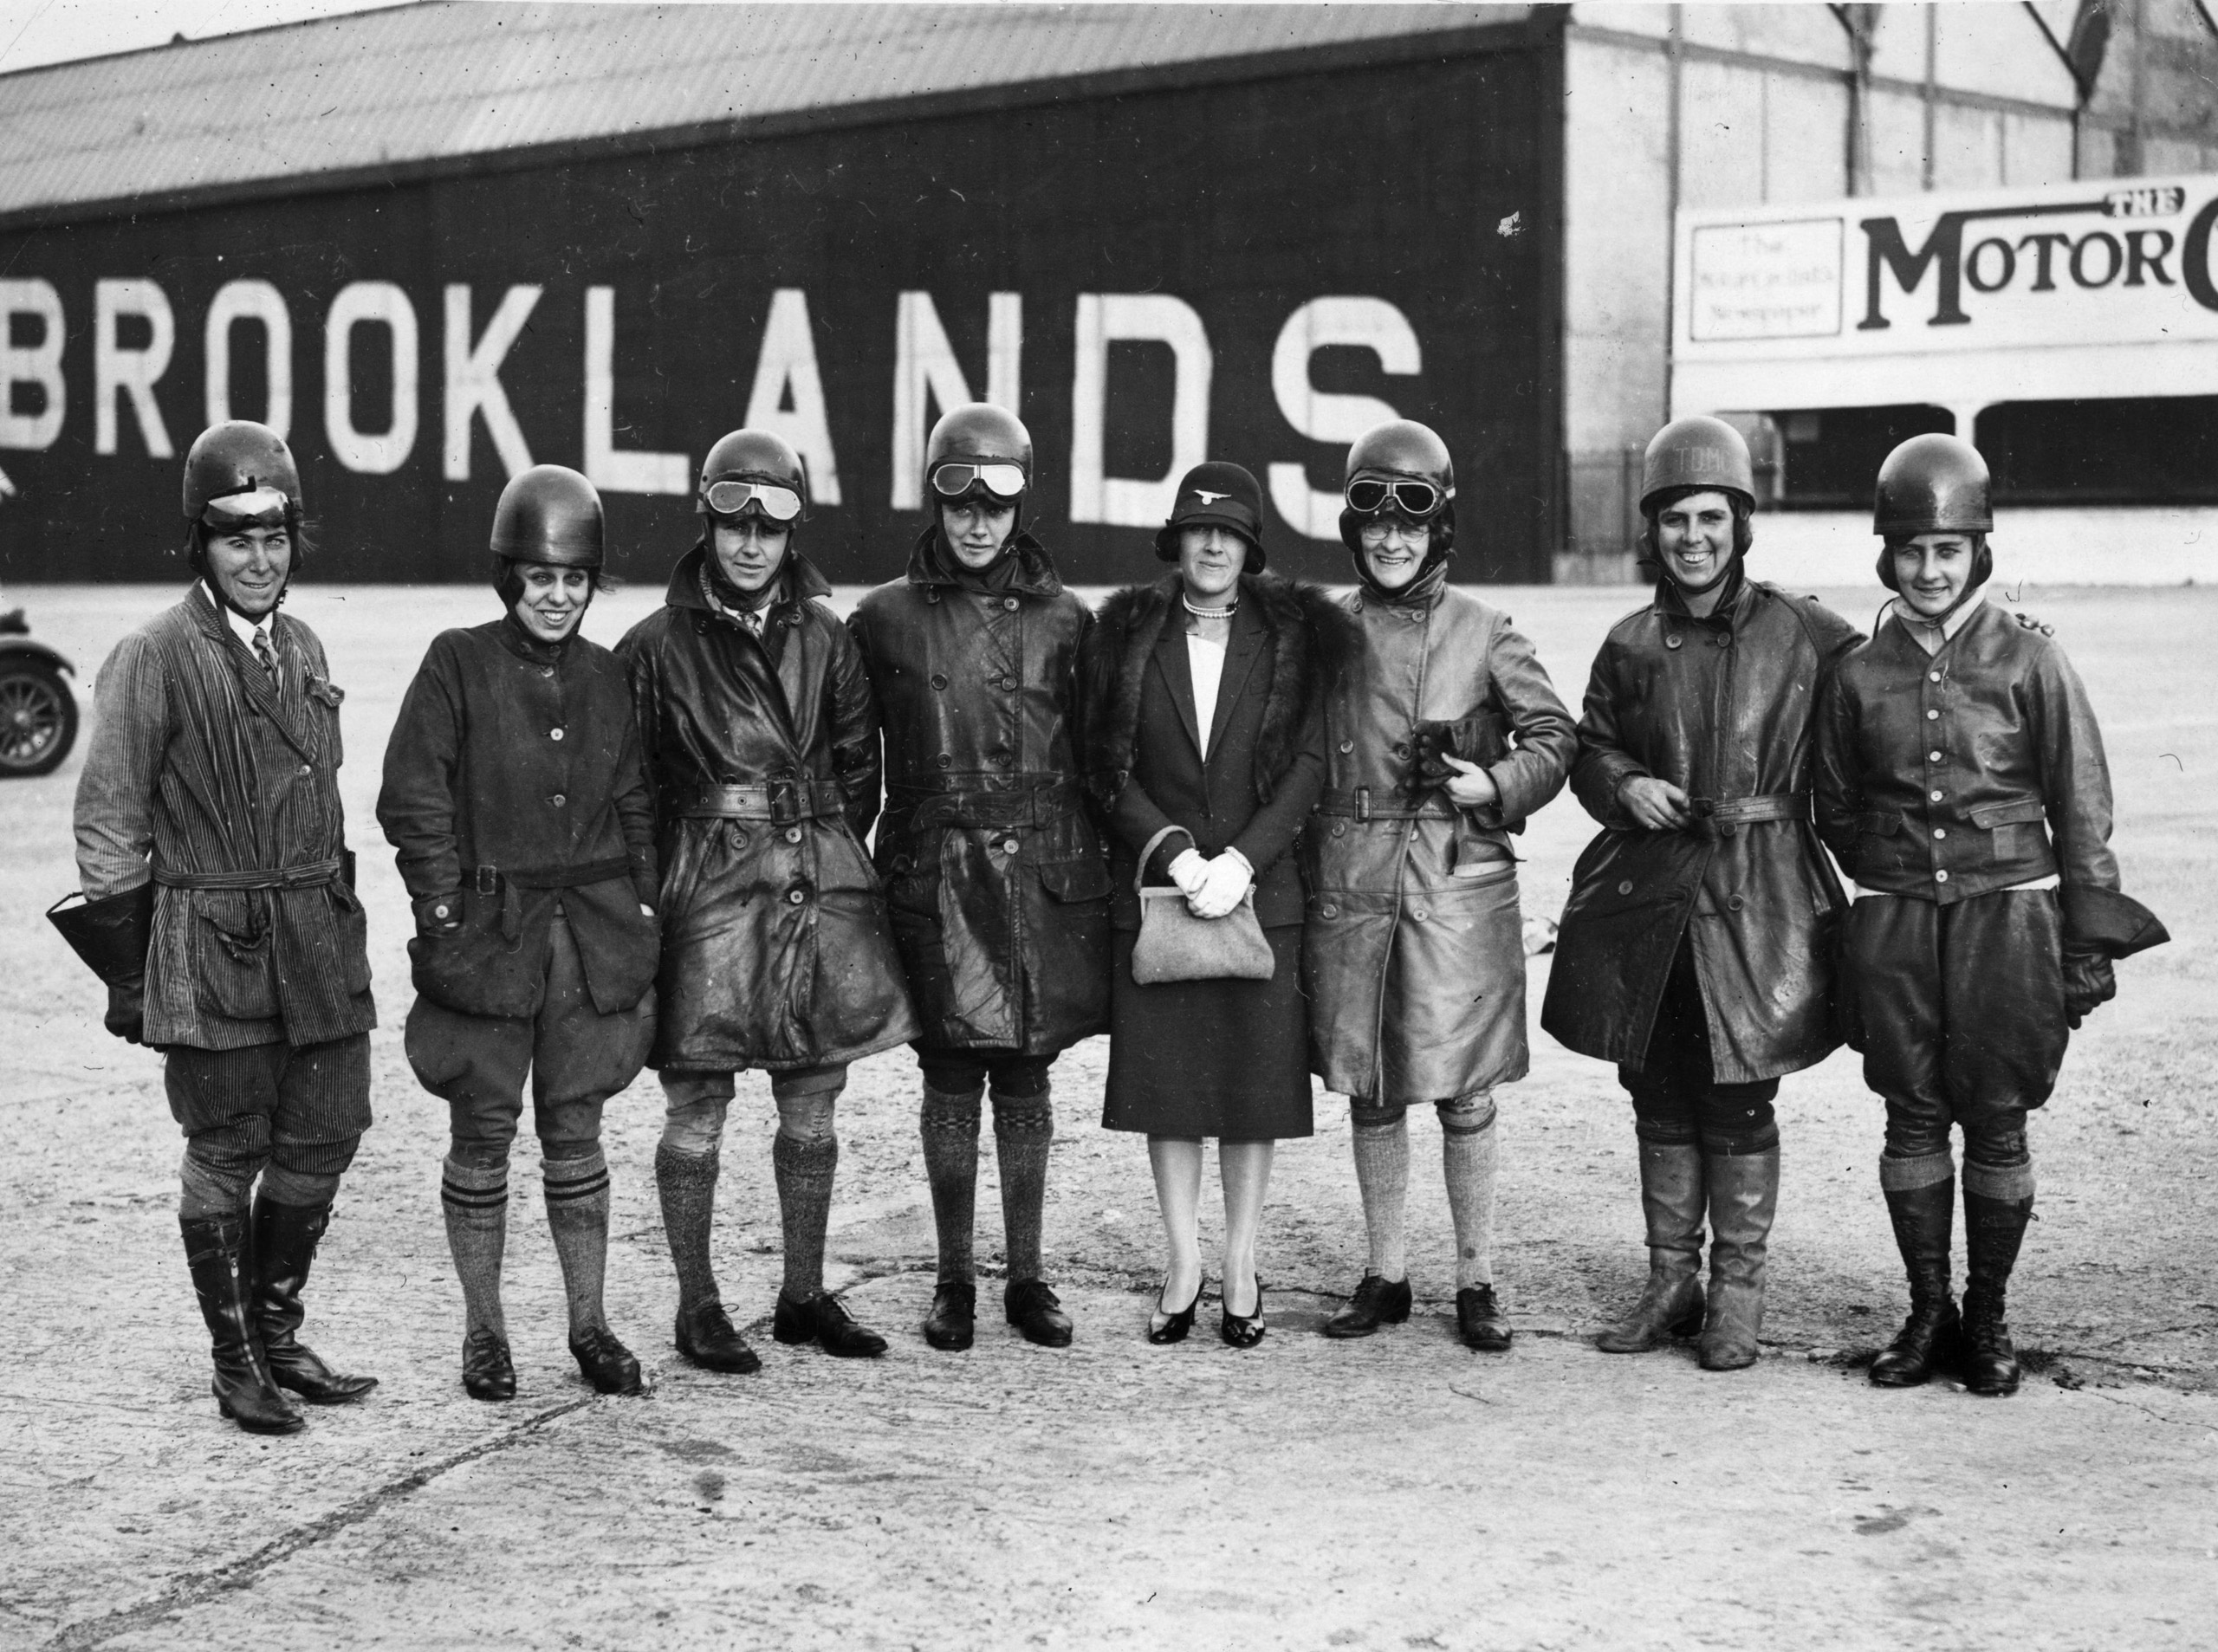 Members of the London Ladies Motor Club, including Sir Malcolm Campbell's wife (fifth from left), at Brooklands race track where they are competing in the first ever British motor cycling race for women.  January 1925.